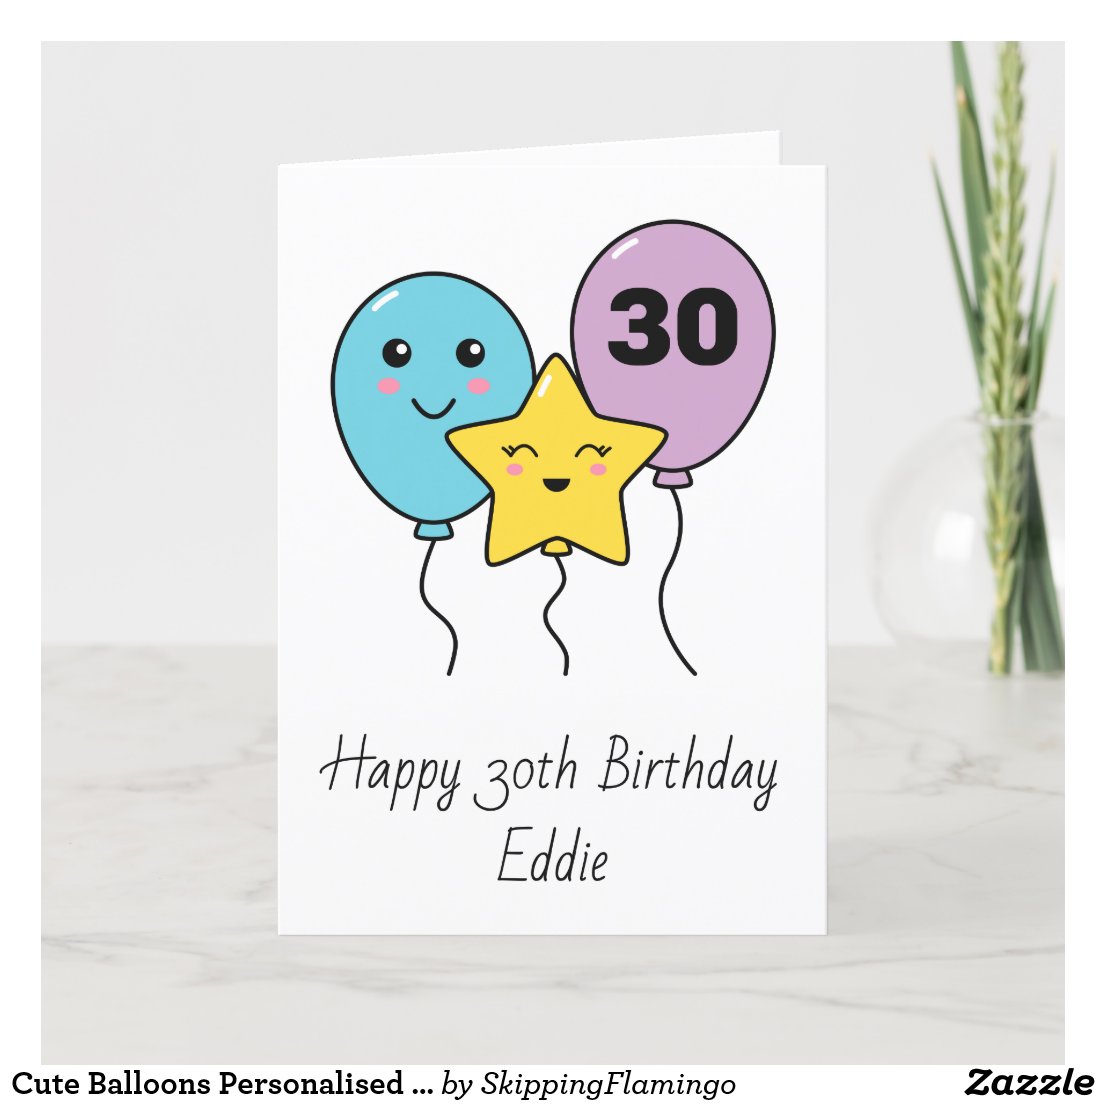 Cute Balloons Personalised 30th Birthday Card